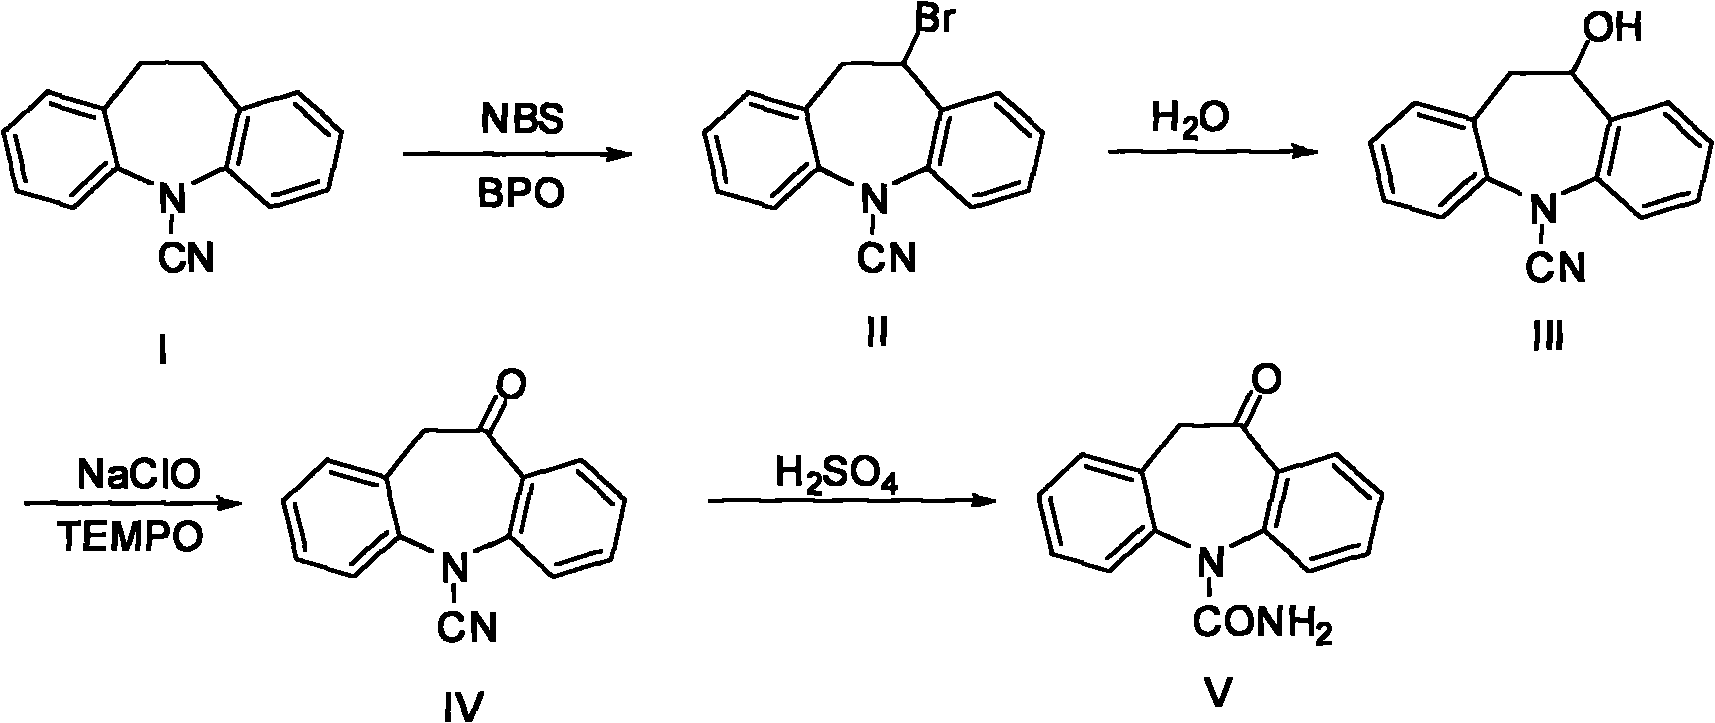 Chemical synthetic method of azepine derivate